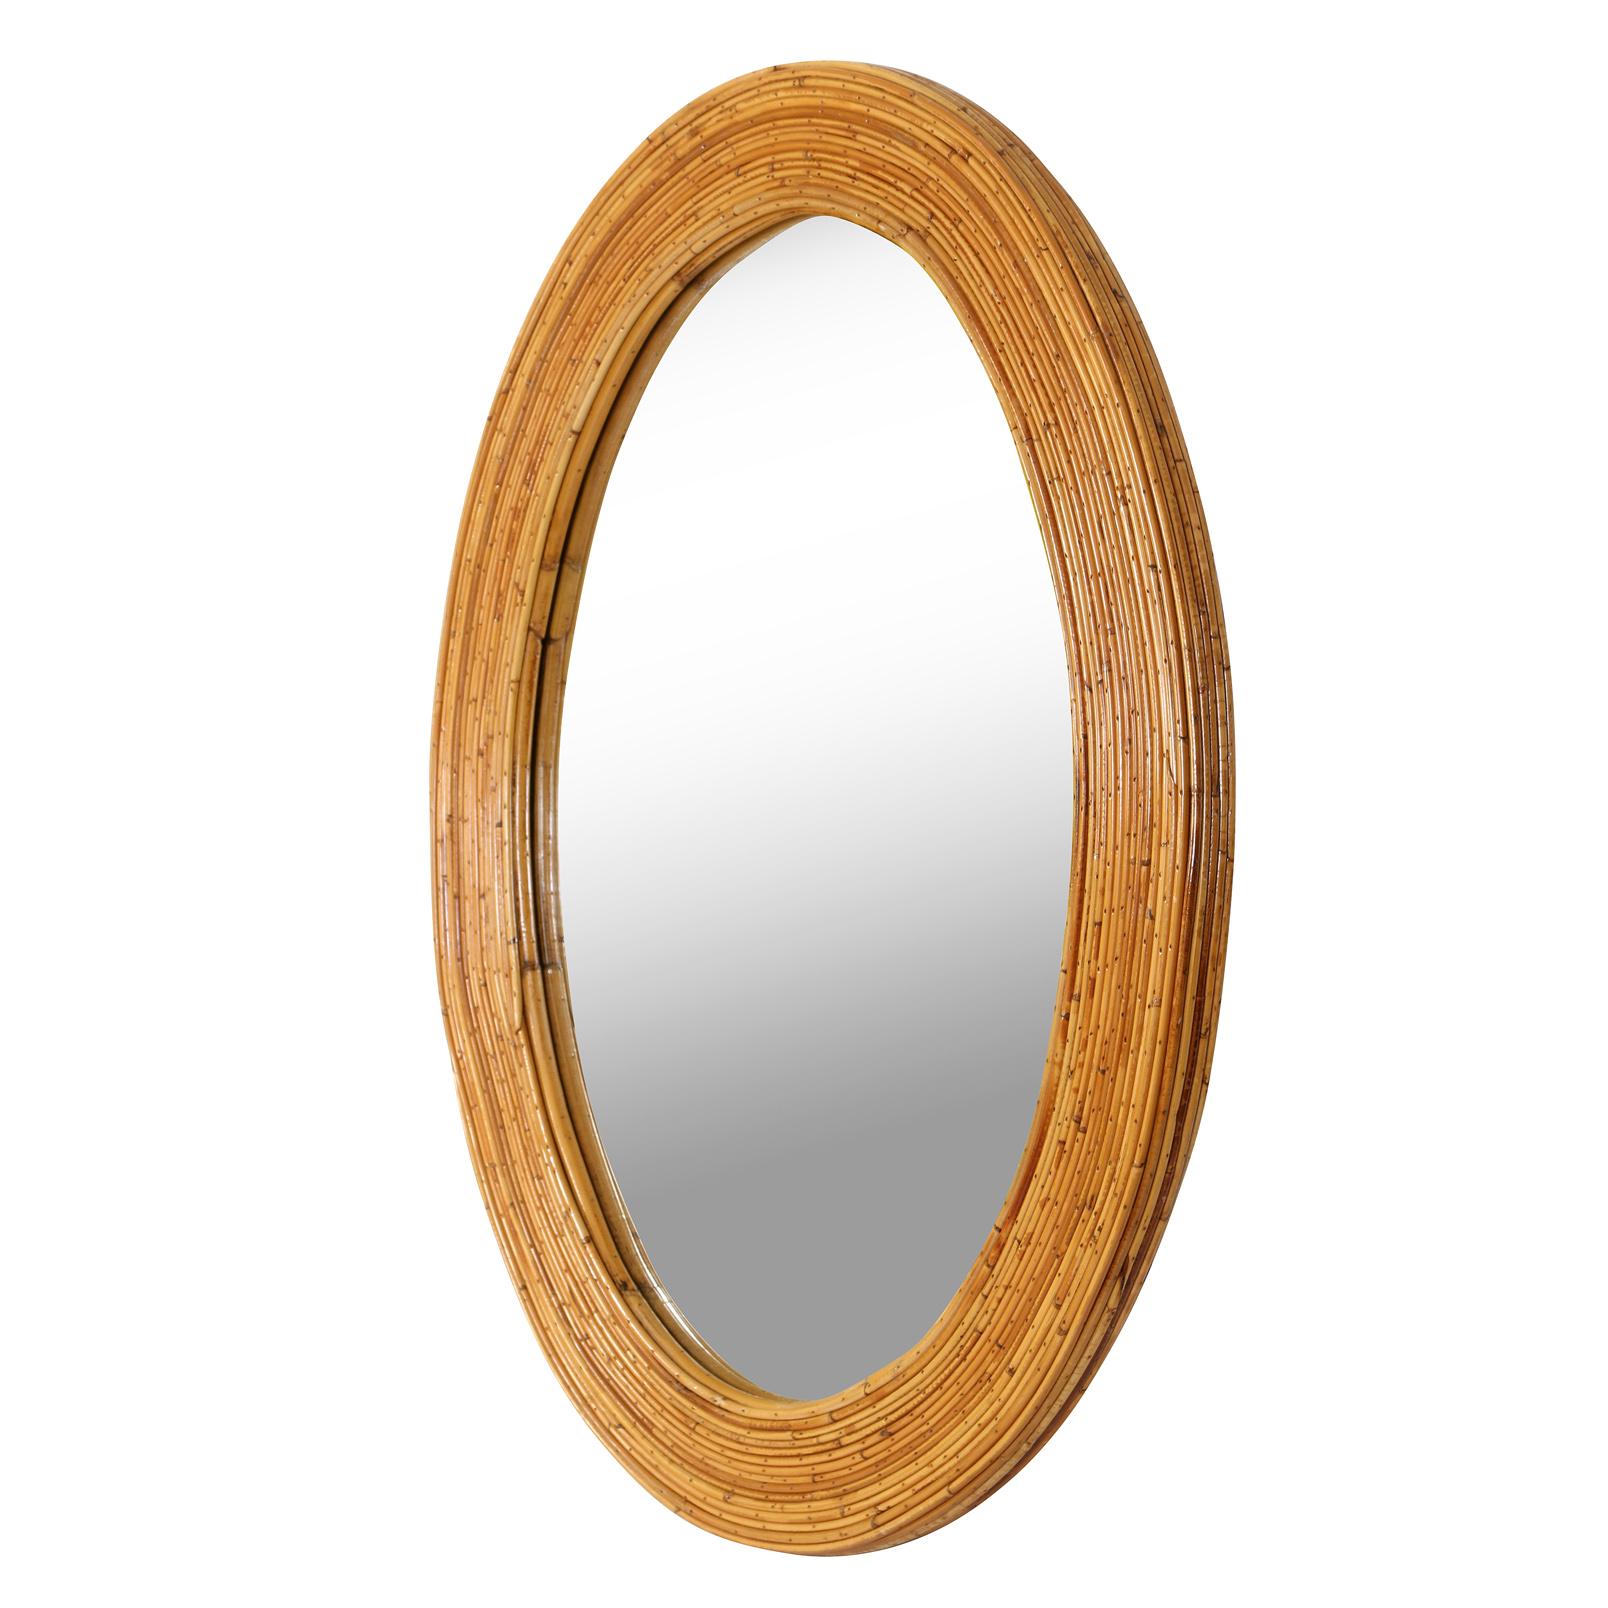 This unique oval shaped mirror with a pencil reed rattan frame has great color and character.  It's texture has a slight sheen to it, and is a great way to add a different color and material to a room.